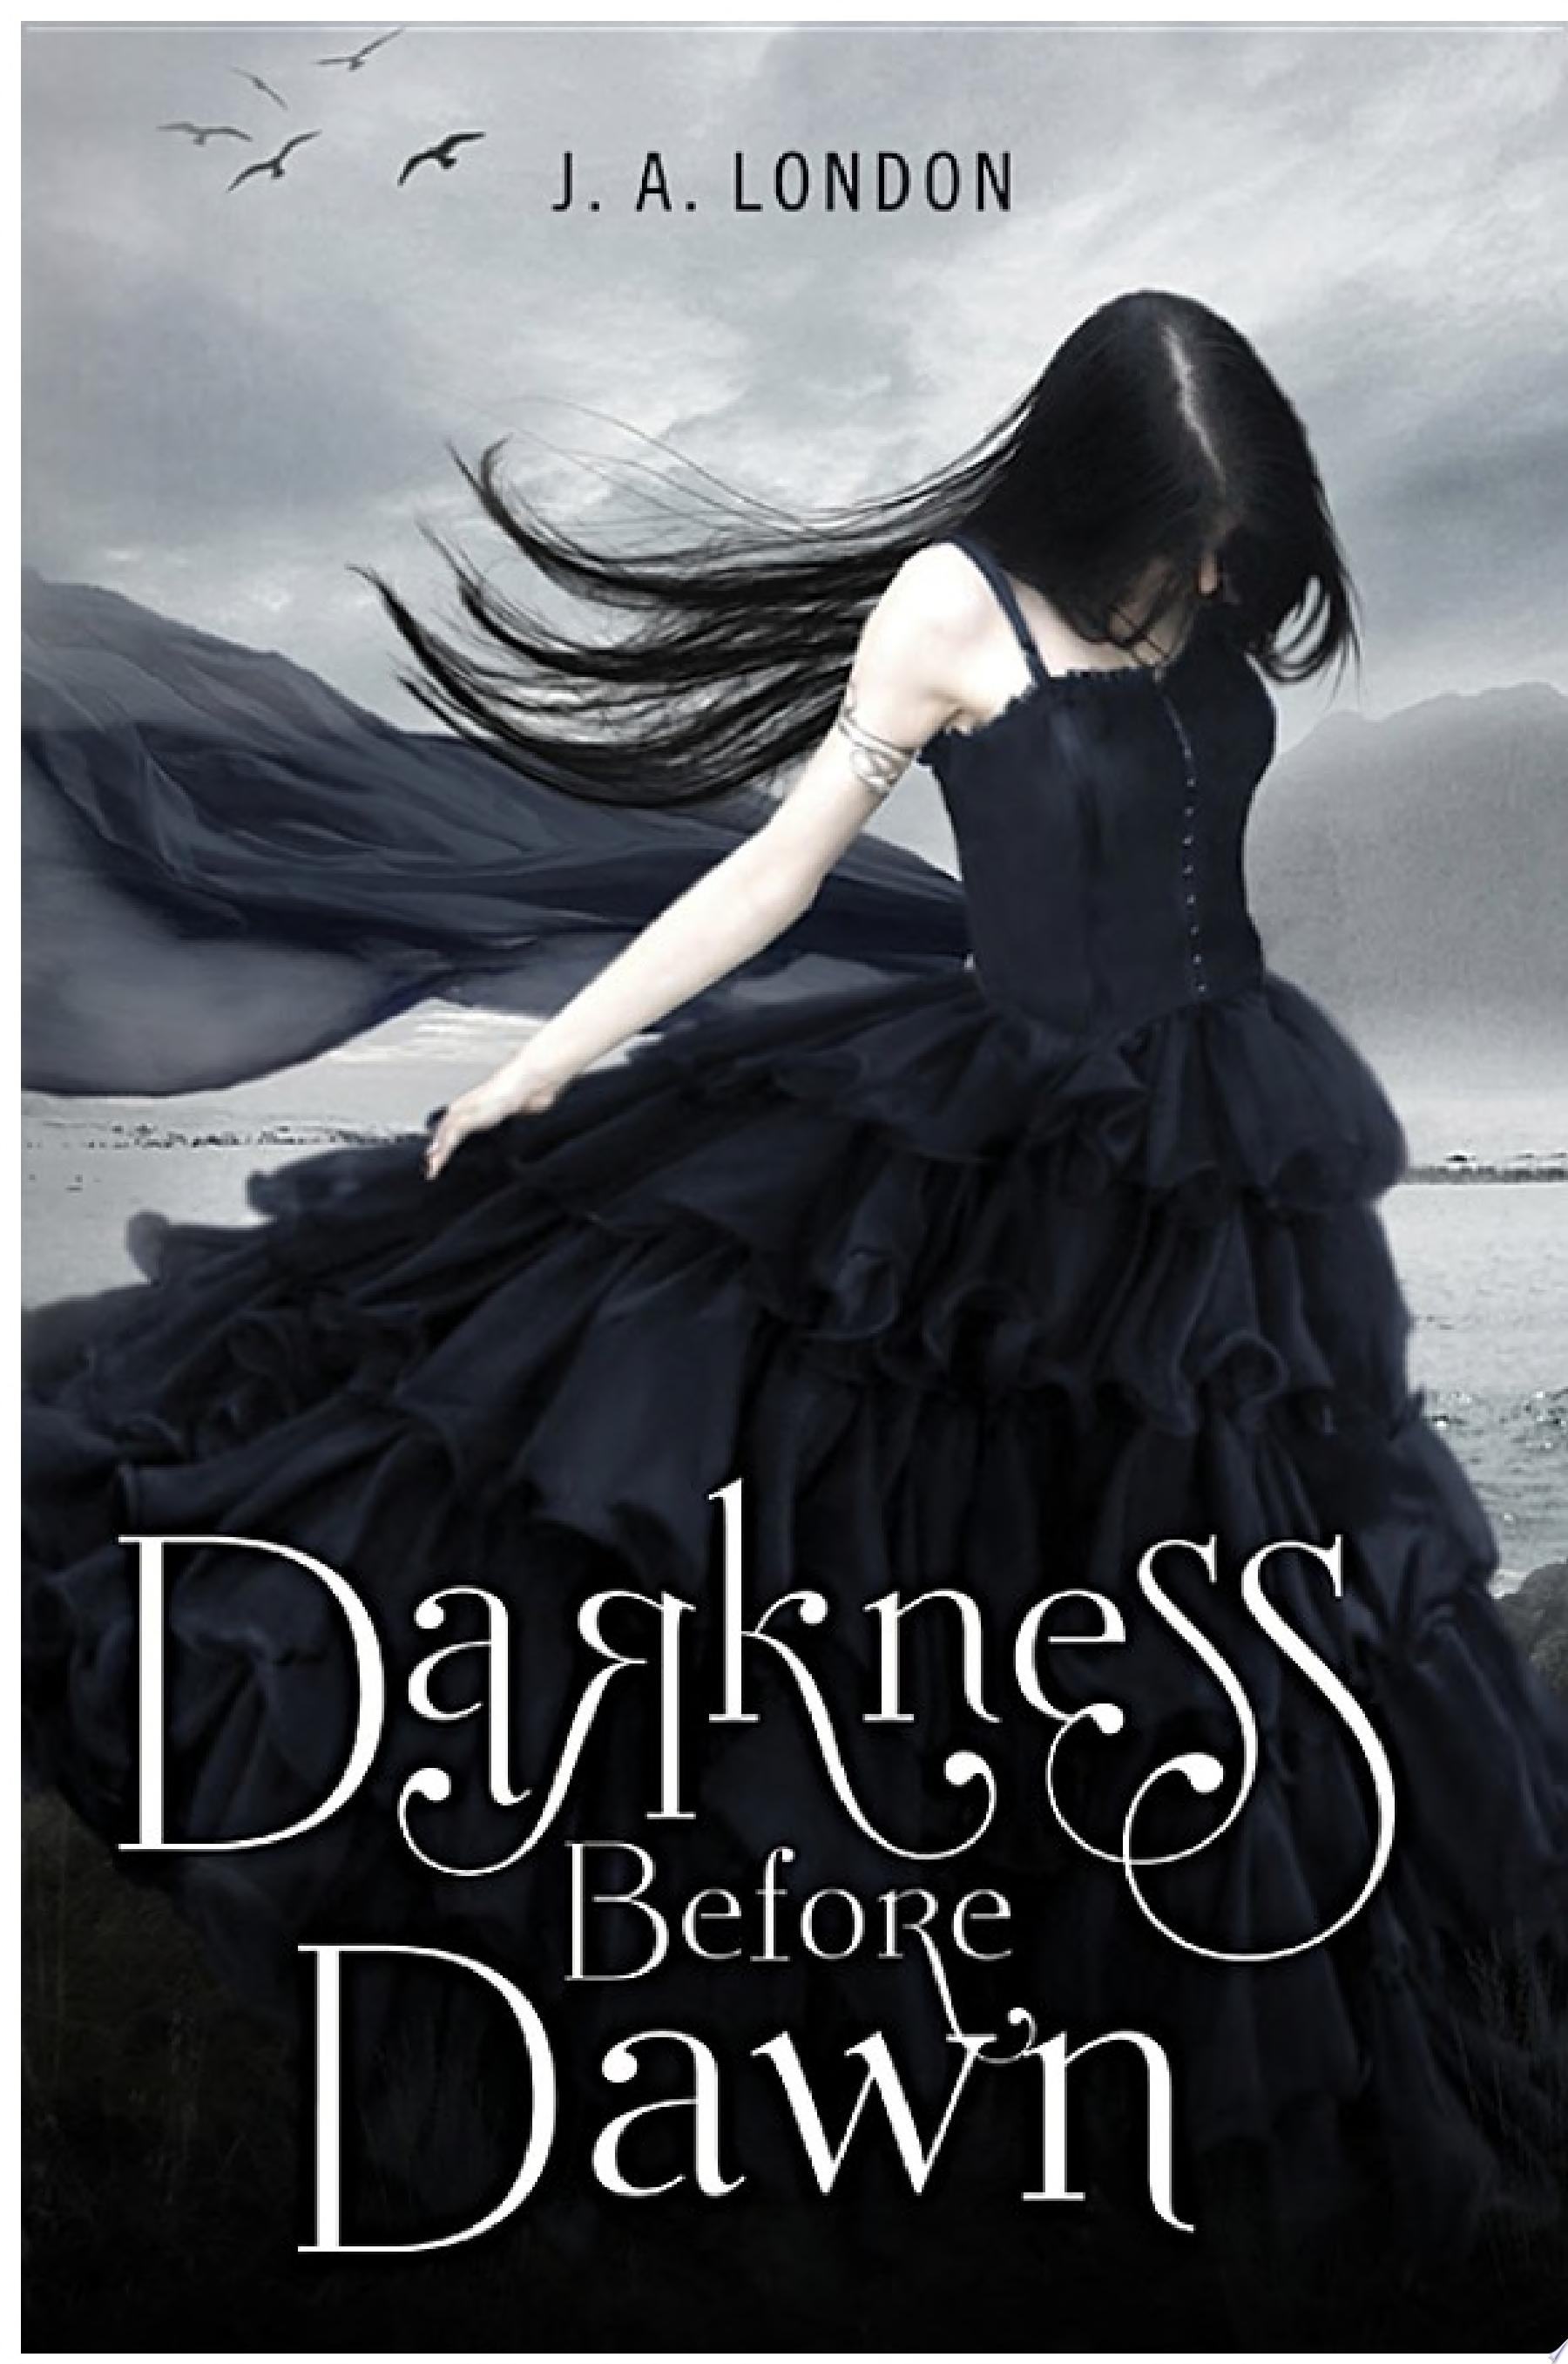 Image for "Darkness Before Dawn"